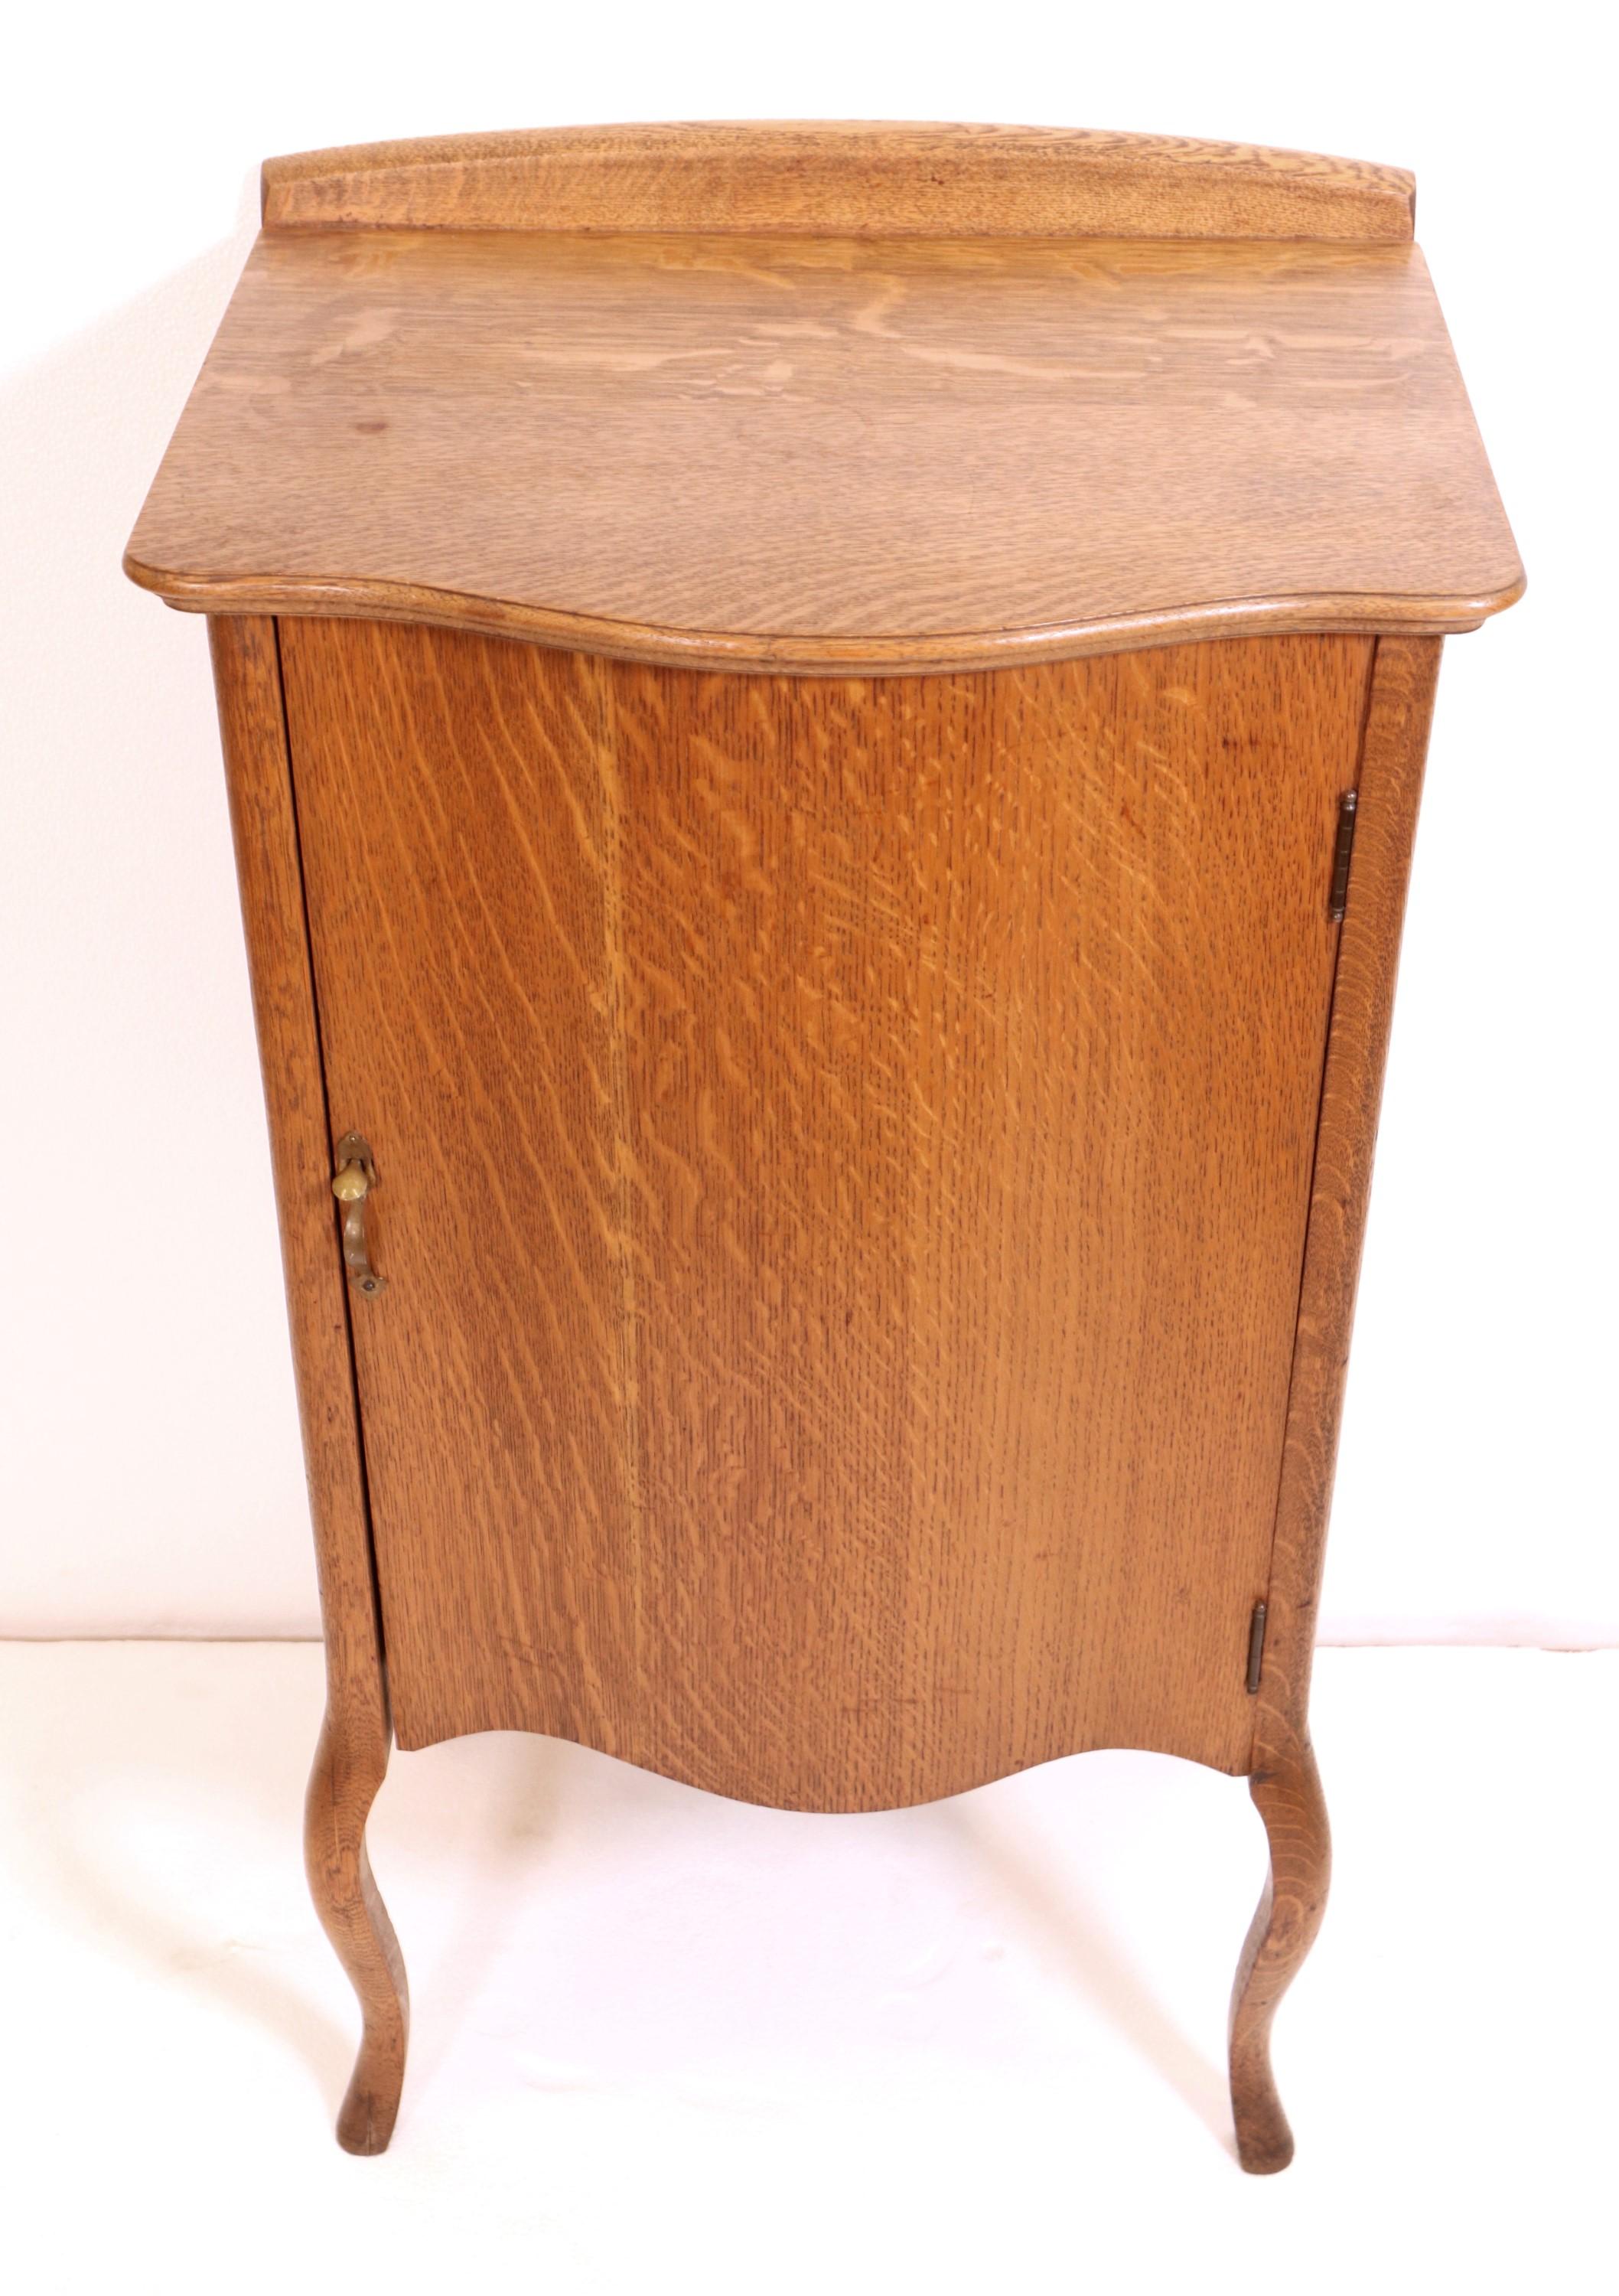 Antique oak sheet music cabinet with curved front and cabriole legs. It has an oak veneer and the cabinet door has a brass handle. There are five music sheet shelves inside the cabinet. This can be seen at our 2420 Broadway location on the upper